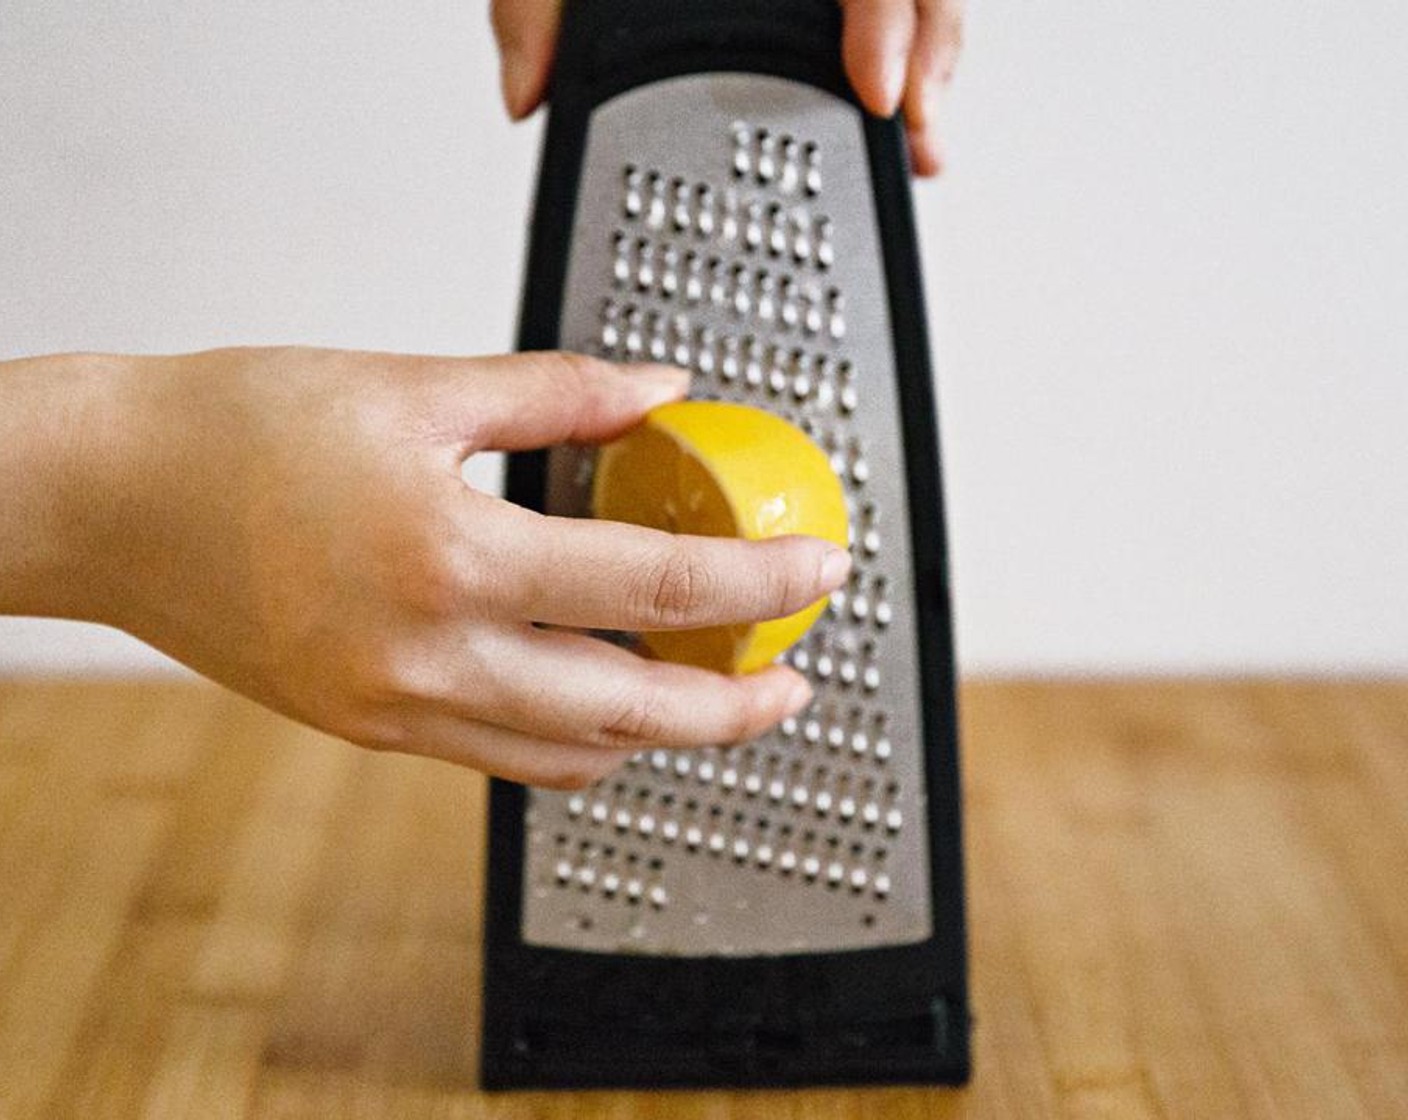 step 6 Take the other half of the lemon and grate it. Add that to the tomato to make the sauce.